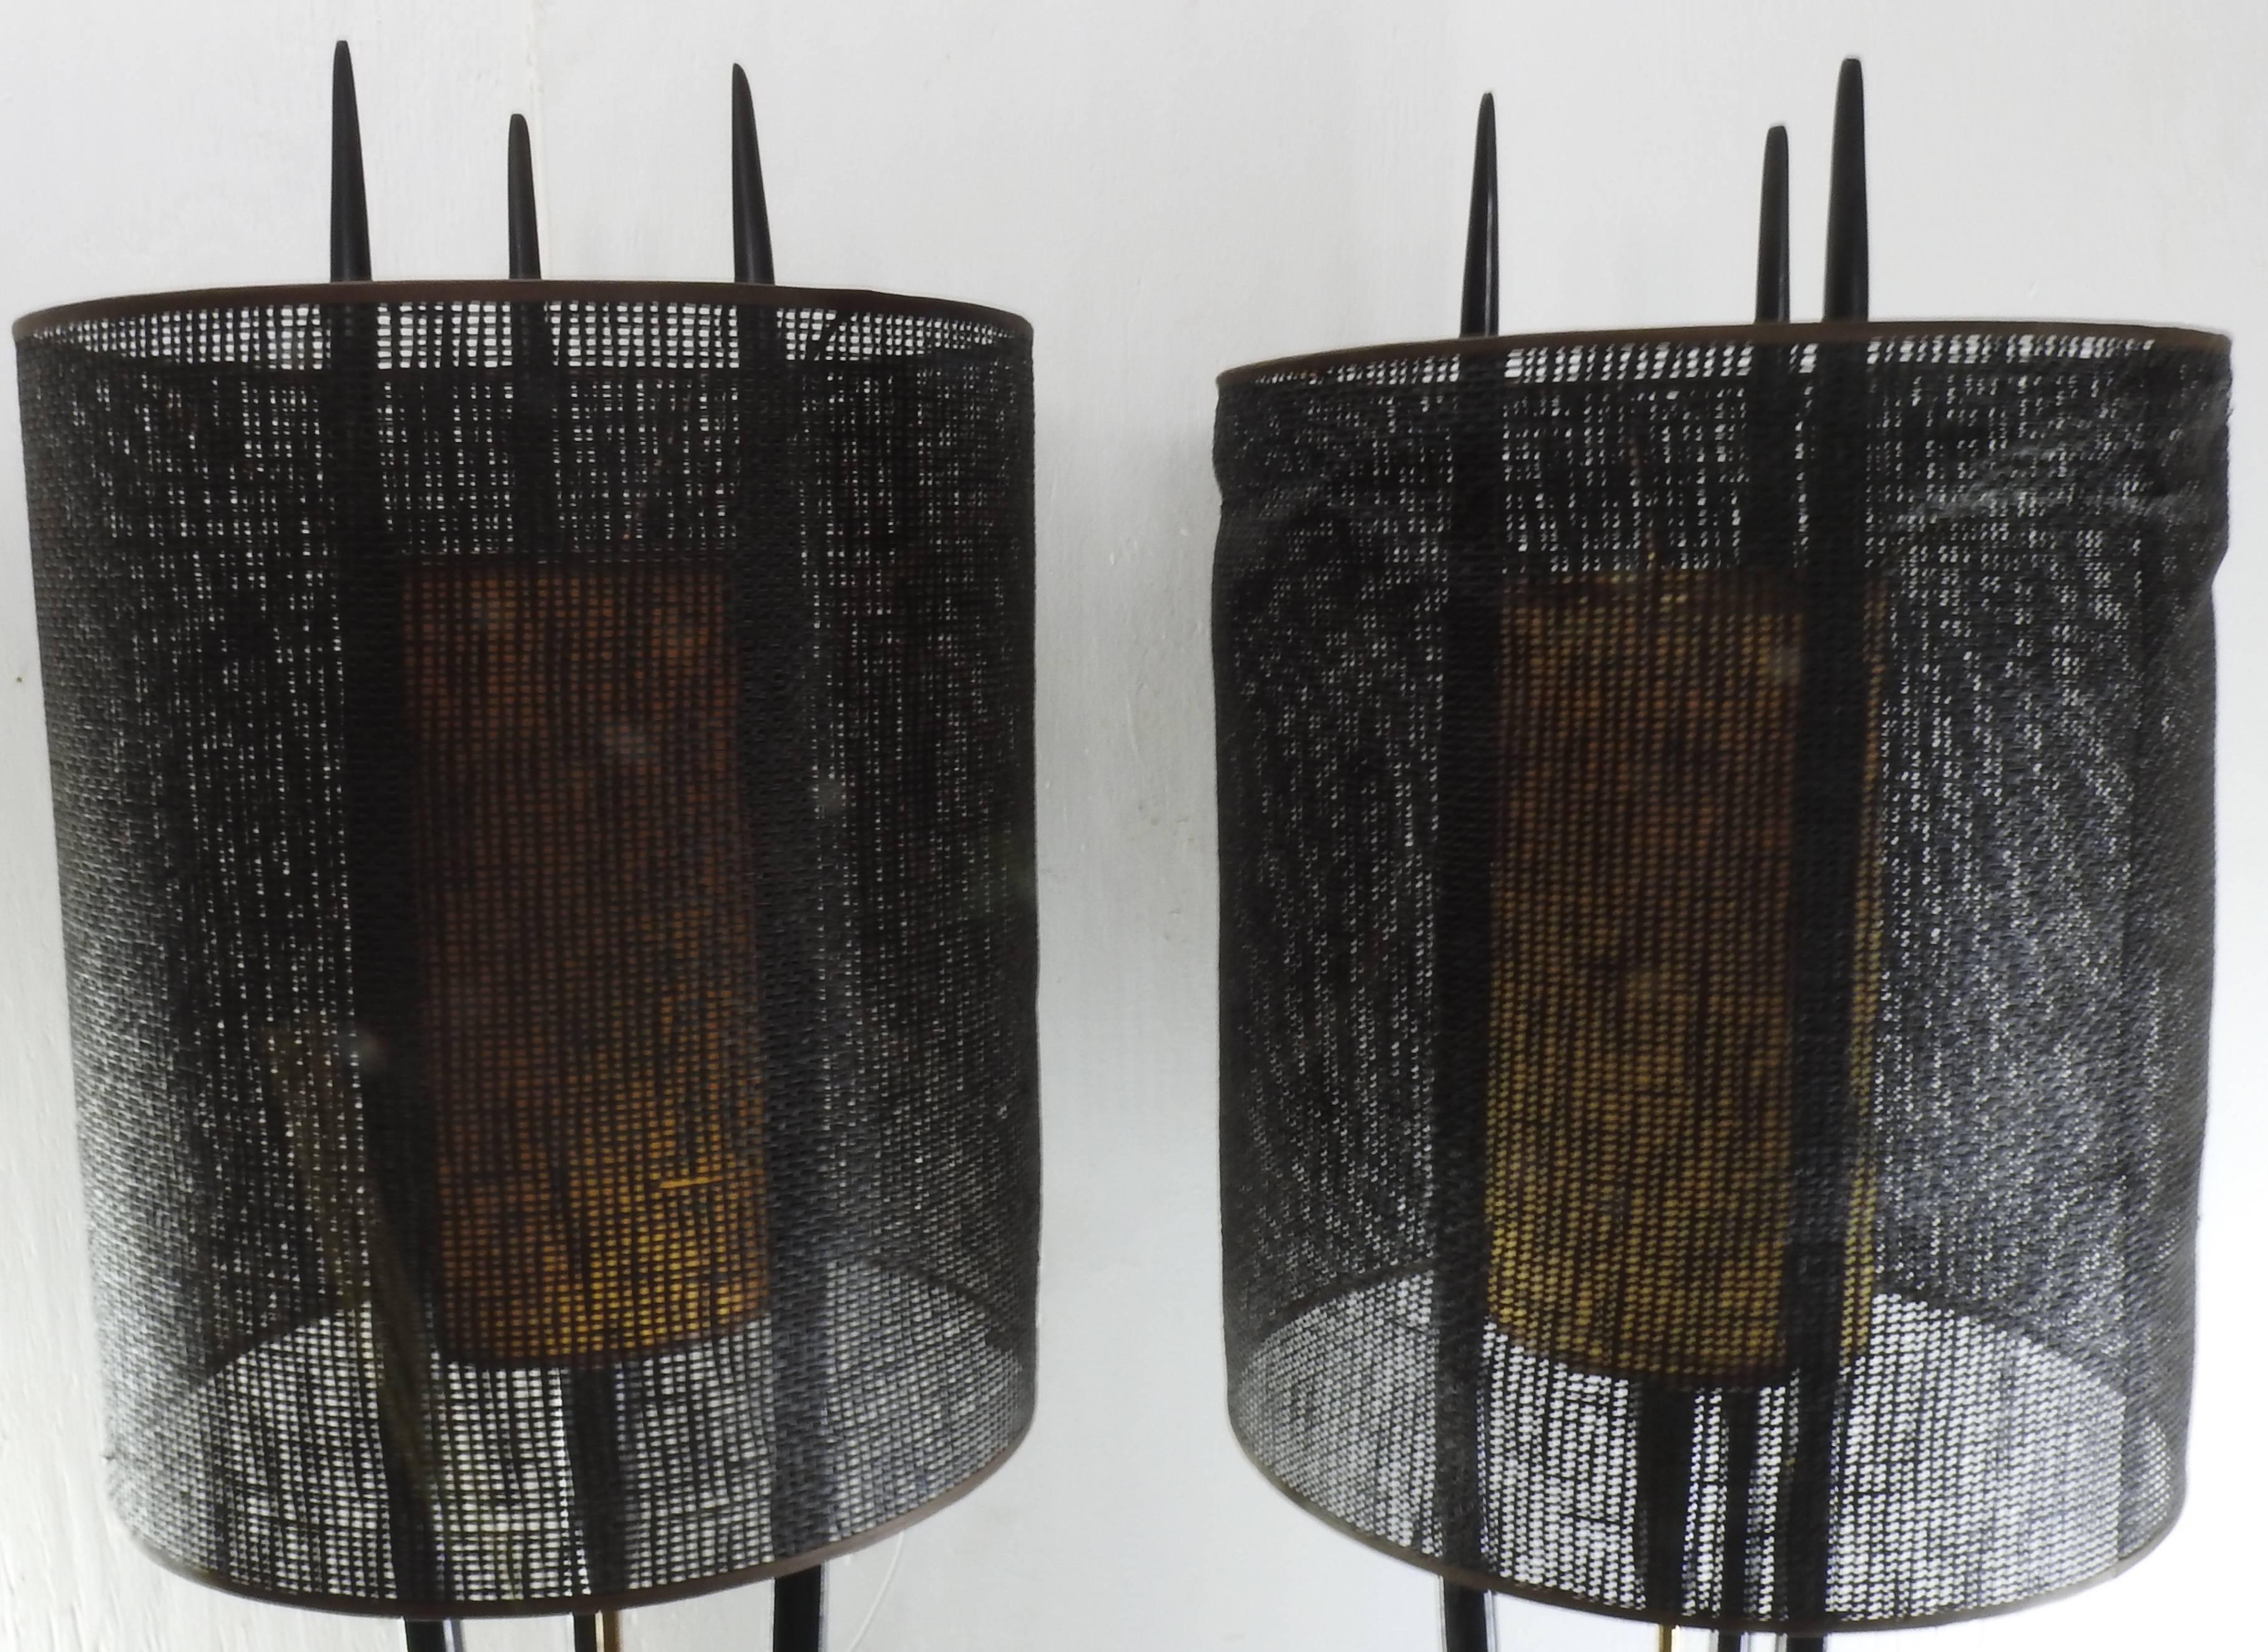 This is a Classic pair of vintage Danish Modern Modeline Rocket table lamps. Lamps feature an ebonized finish, with secondary inner parchment shade, and outer open weave drum shade and center pull. The shade is mounted to three teak batons. These